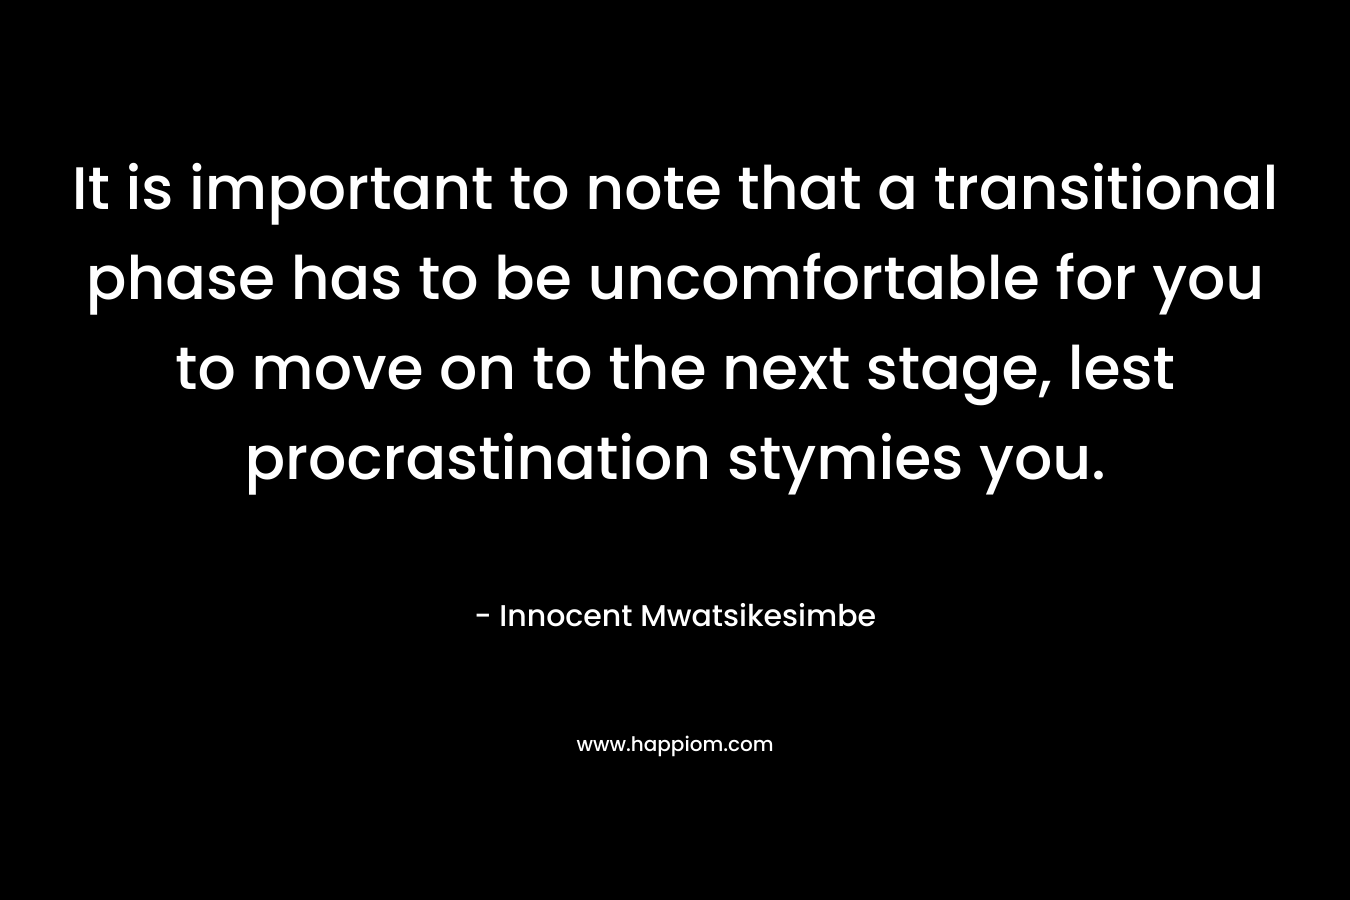 It is important to note that a transitional phase has to be uncomfortable for you to move on to the next stage, lest procrastination stymies you. – Innocent Mwatsikesimbe